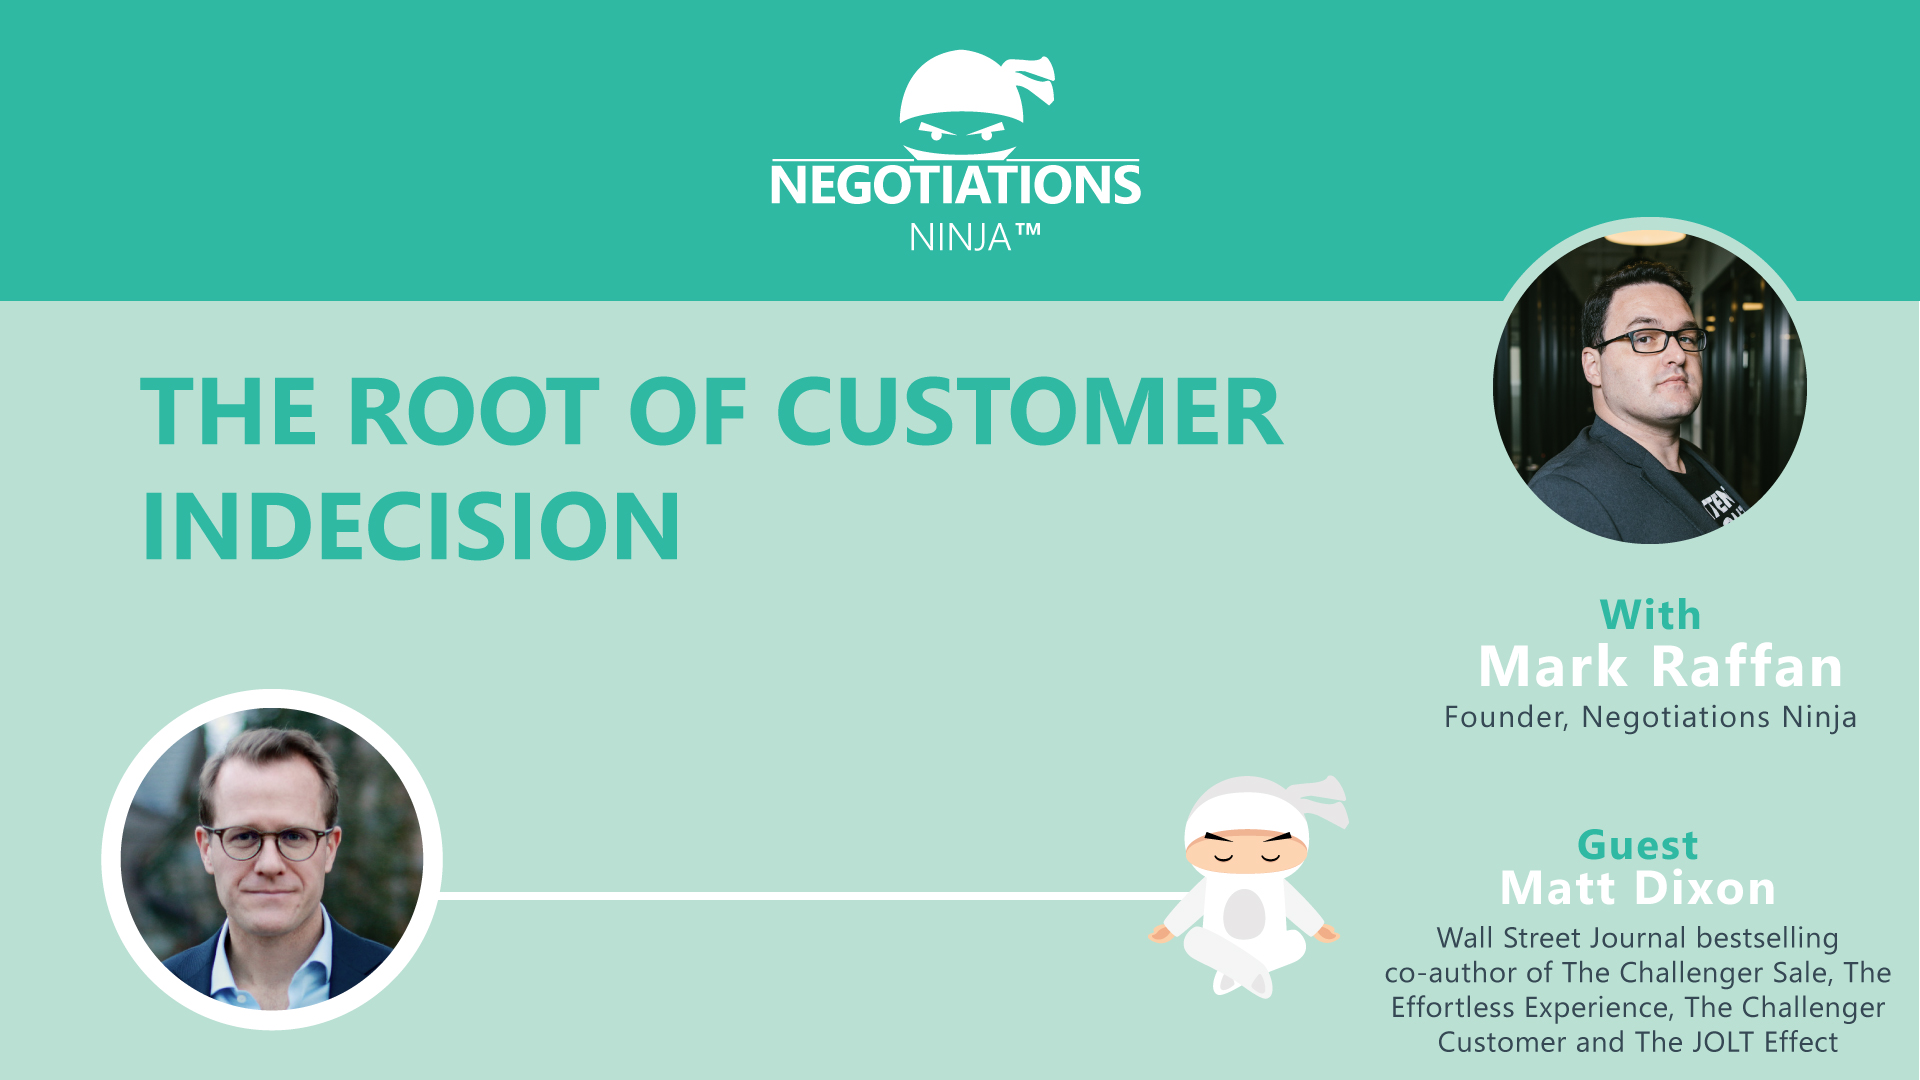 The root of customer indecision with matt dixon